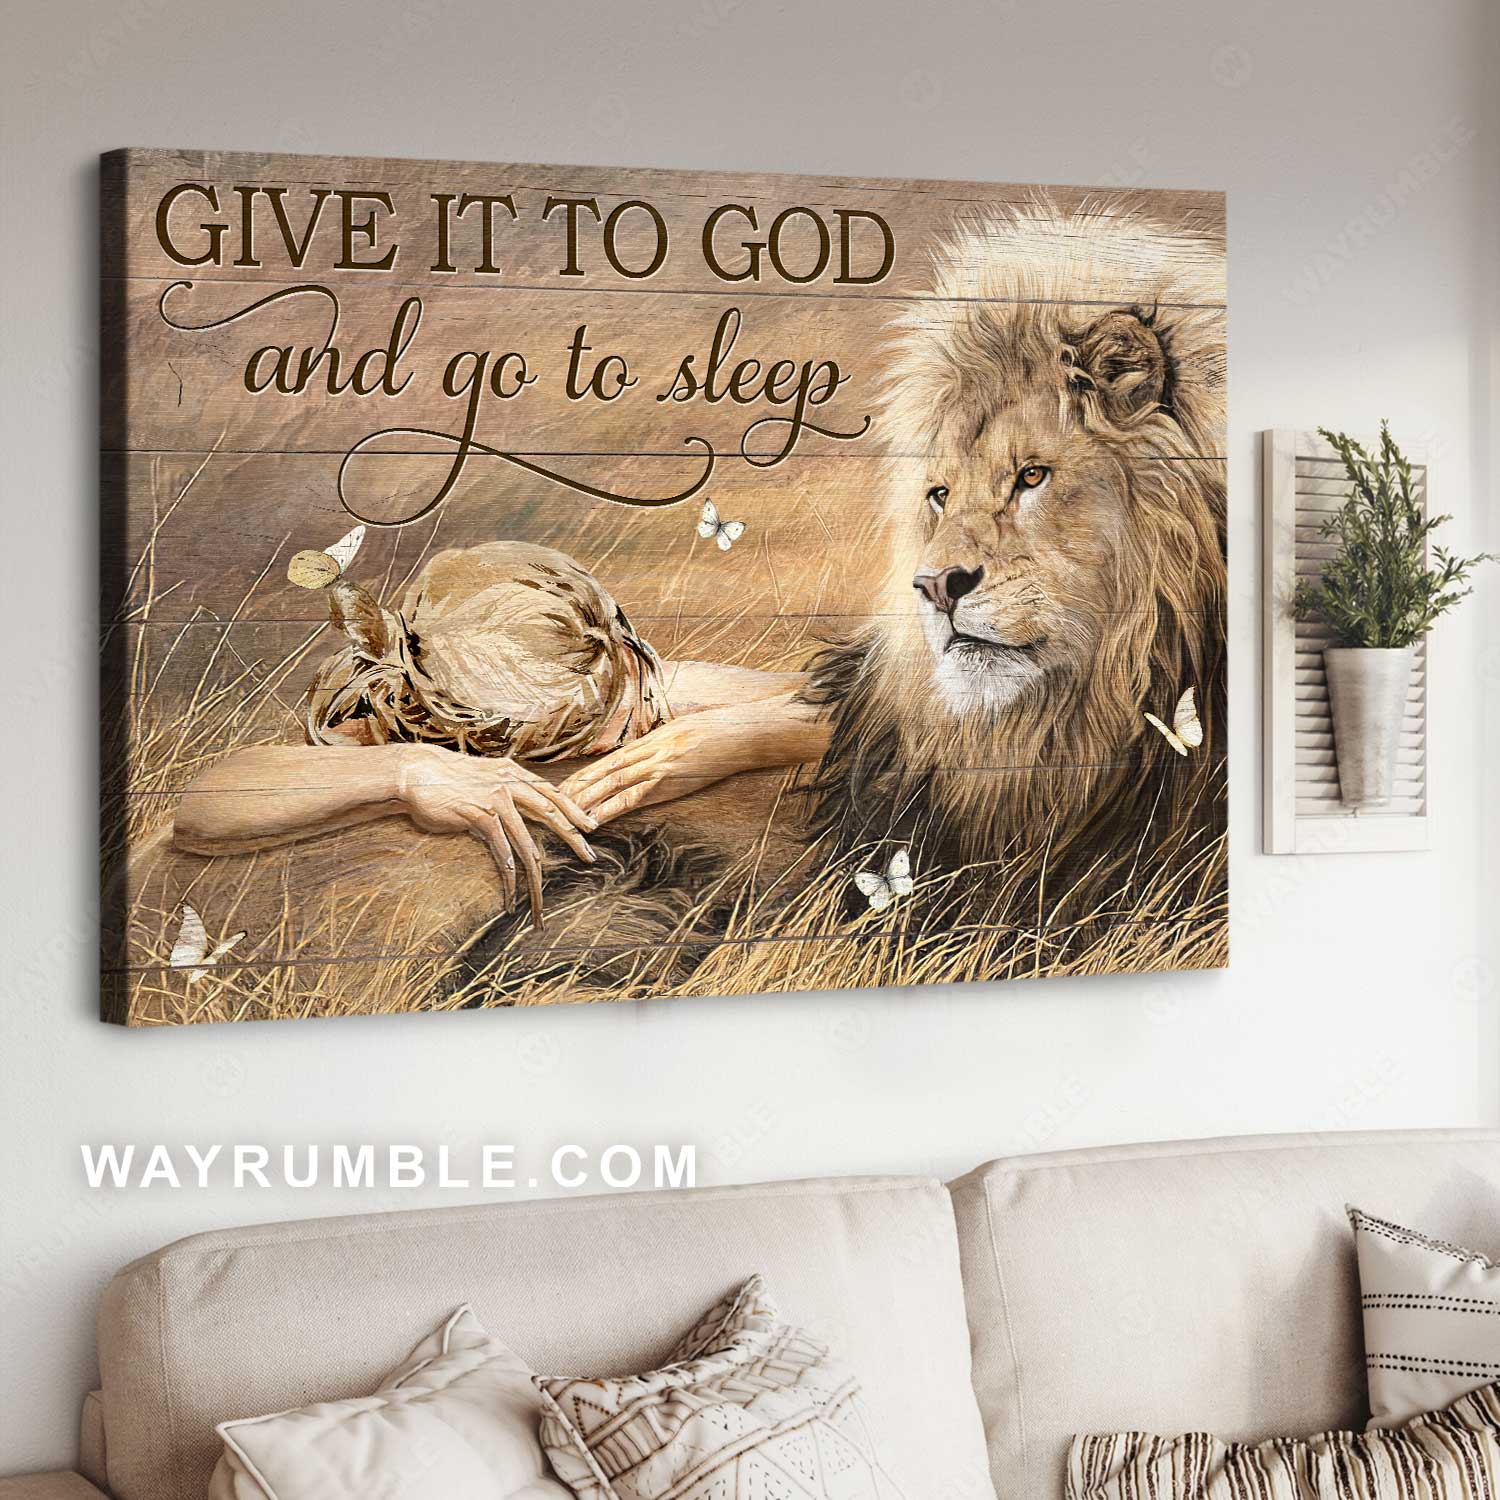 Sleeping girl, Lion of Judah, Rice field, Give it to God and go to sleep - Jesus Landscape Canvas Prints, Home Decor Wall Art